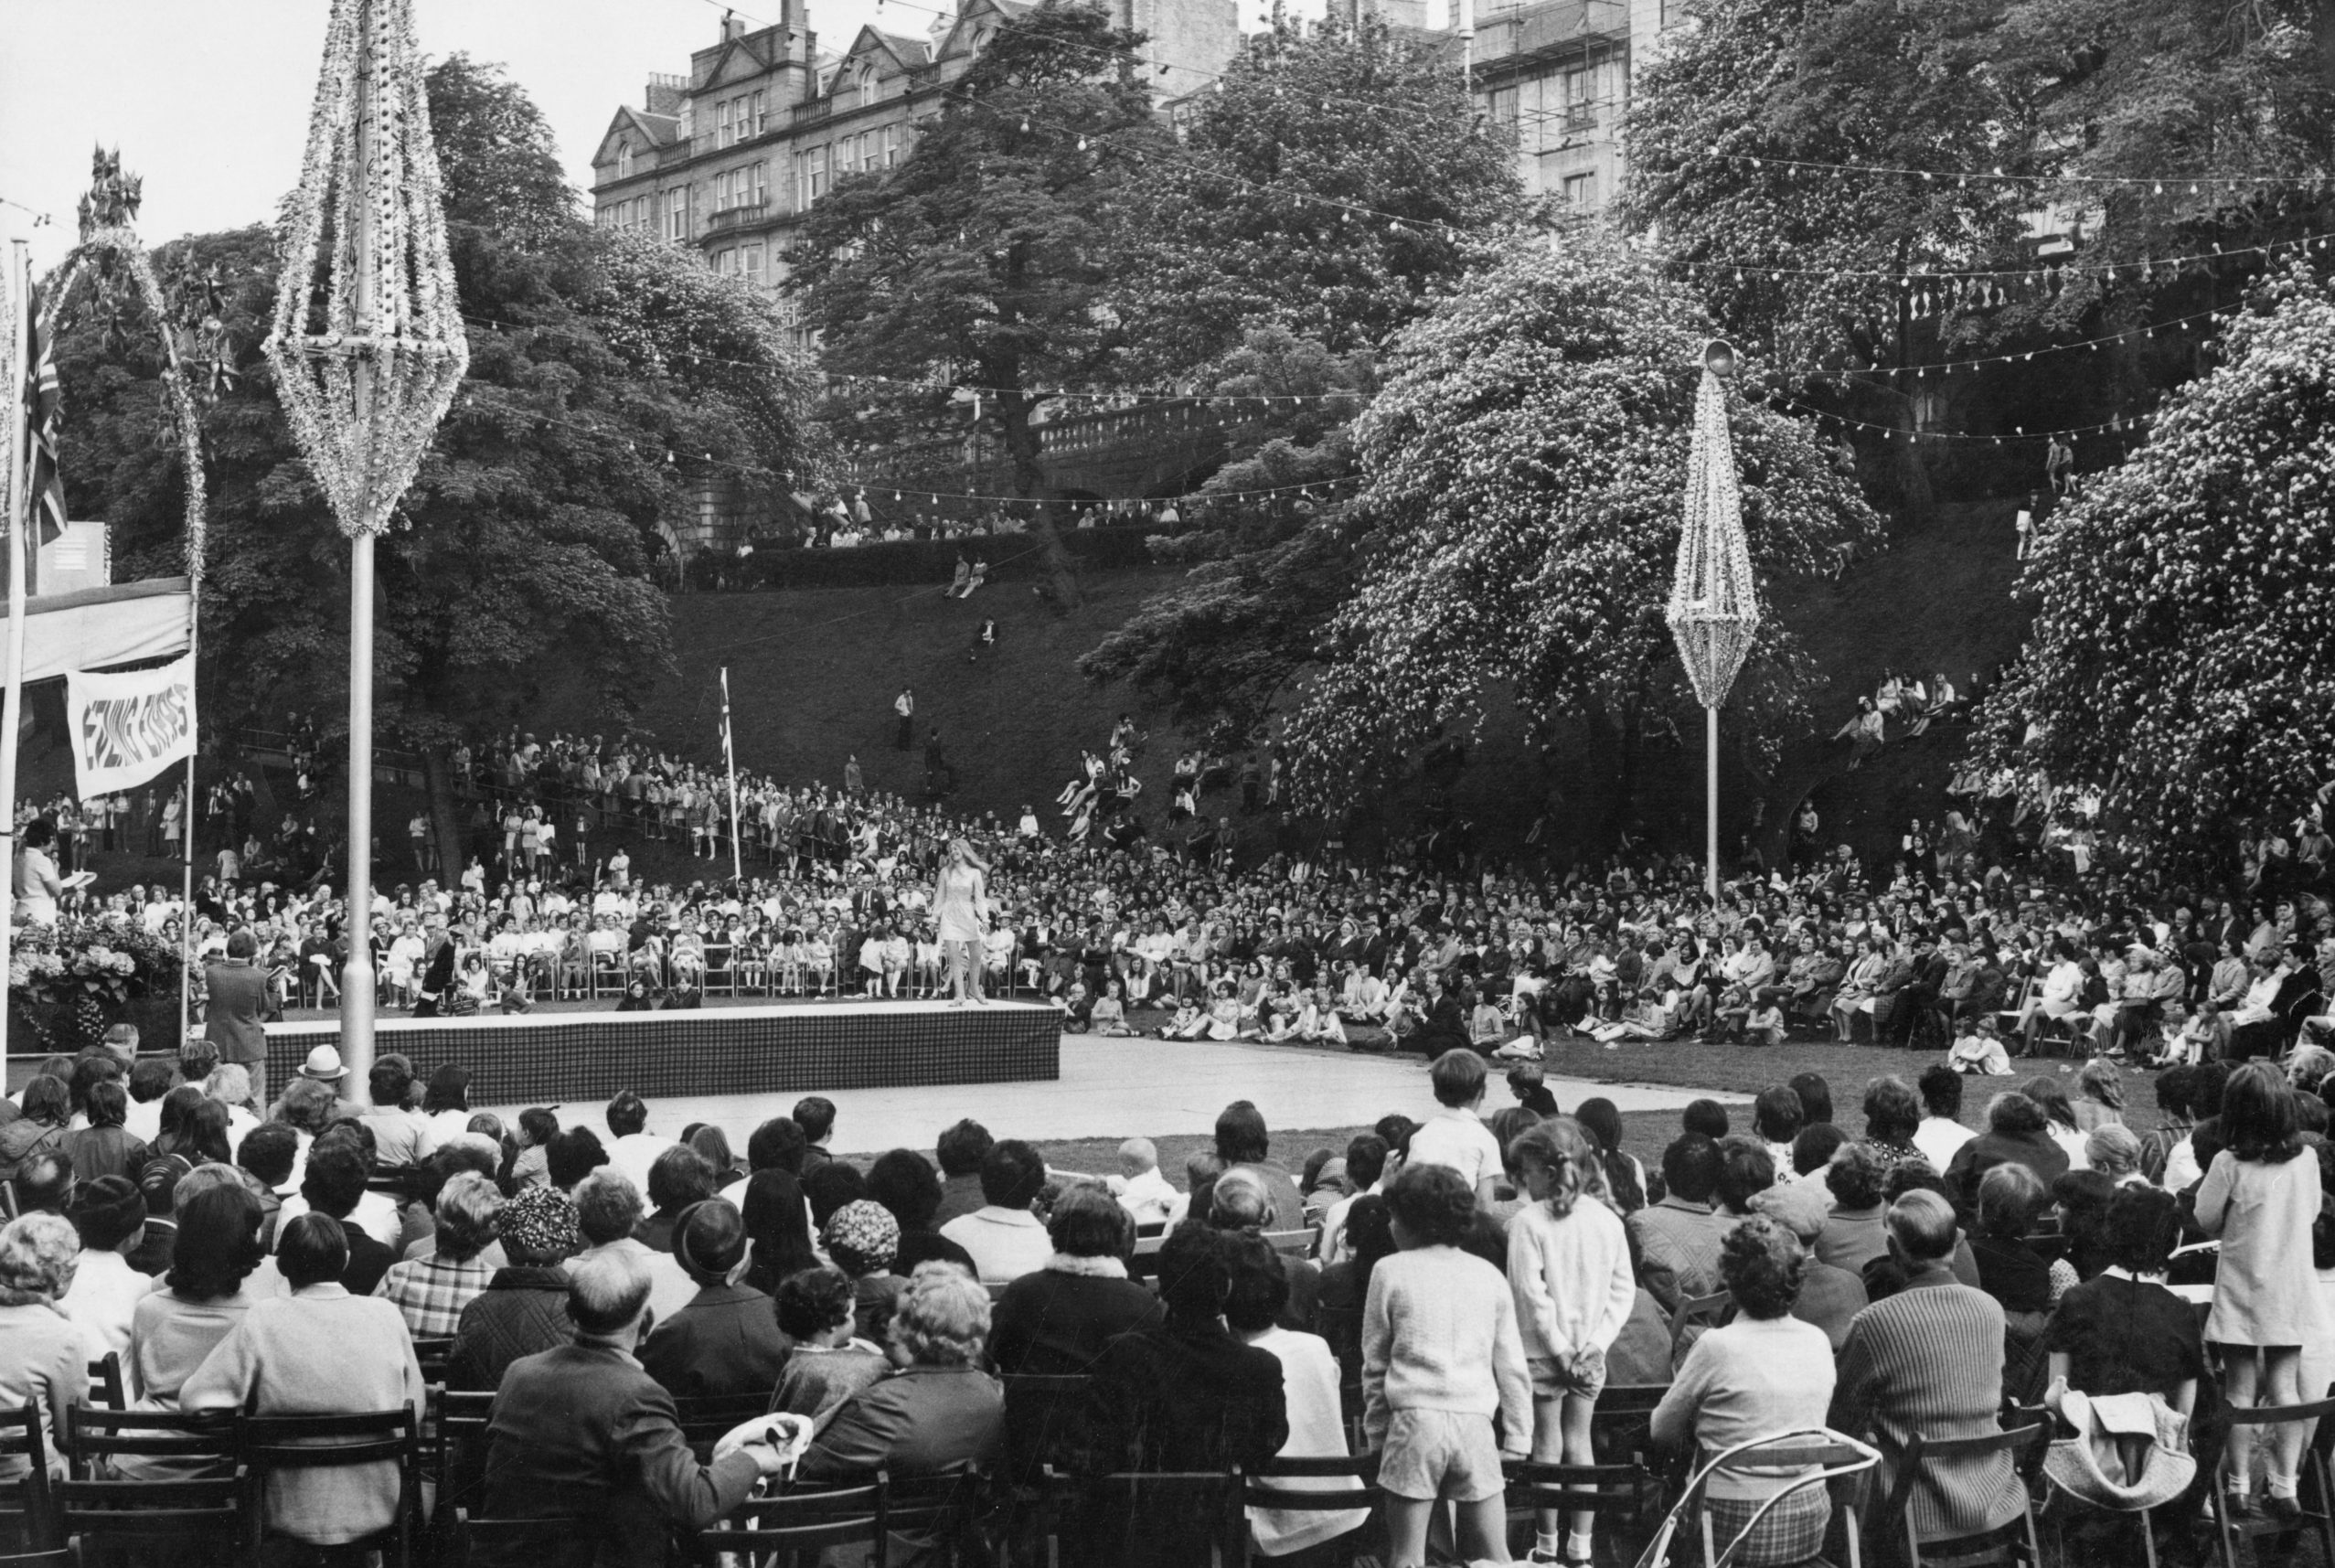 1970 Aberdeen Festival Queen contest held in Union Terrace Gardens, with crowds of onlookers